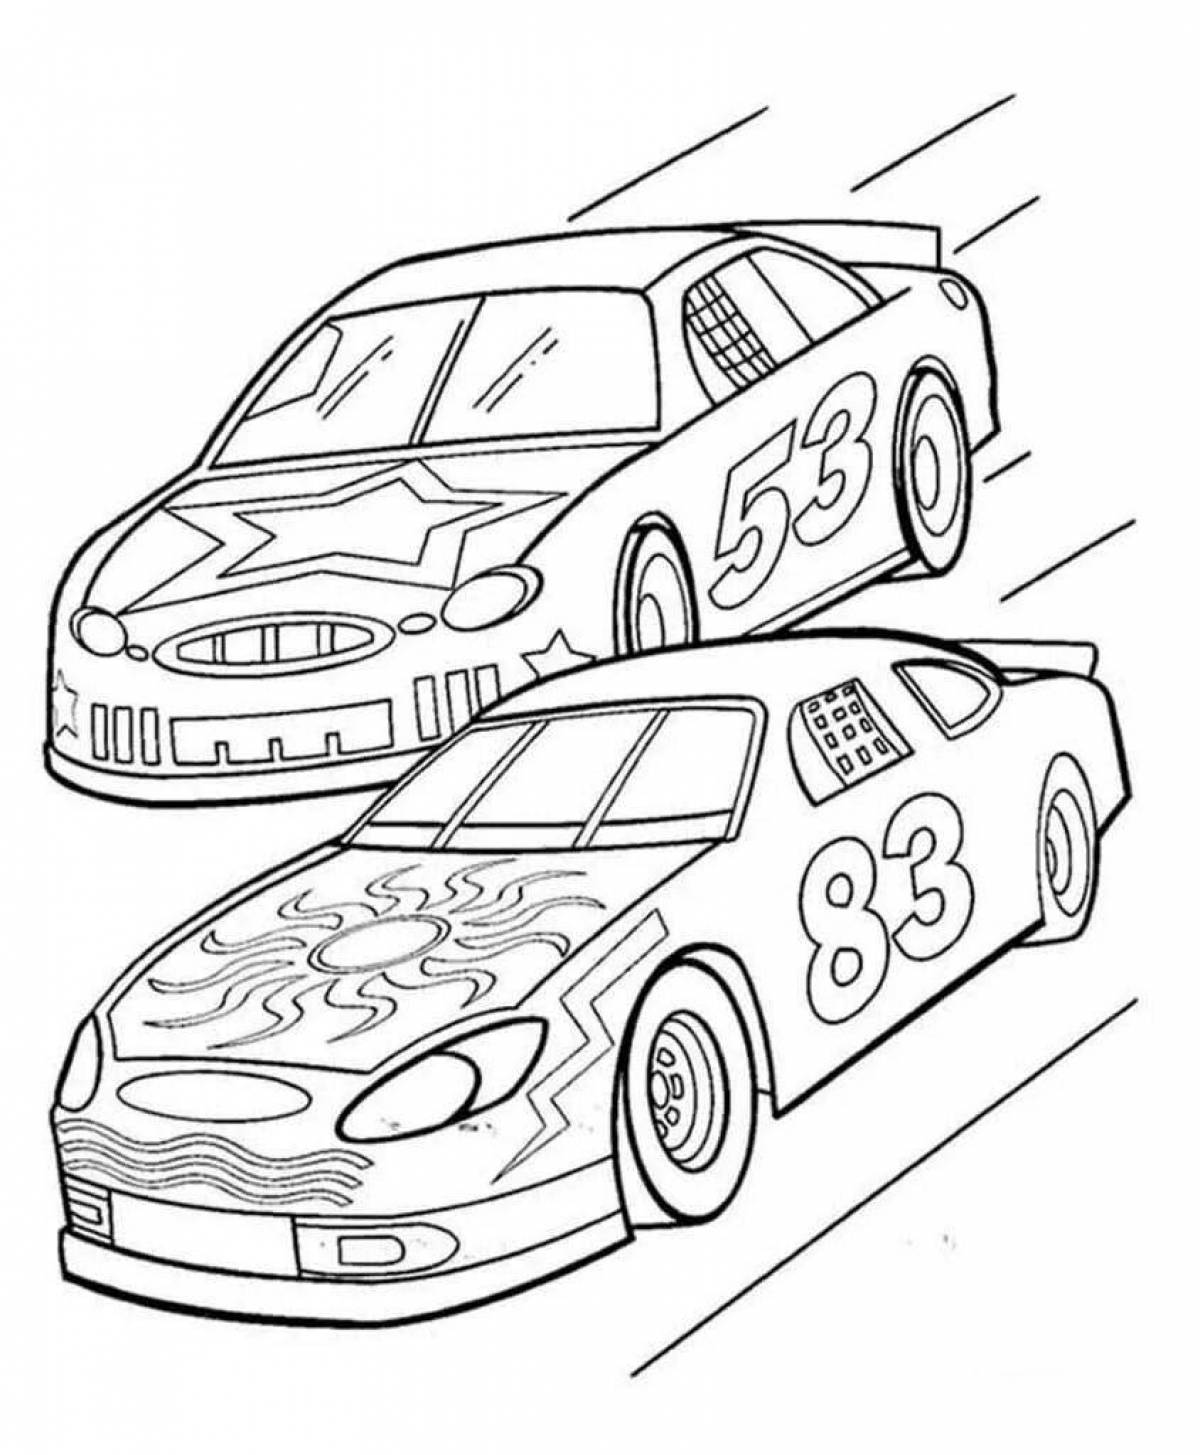 Vibrant car coloring pages for kids